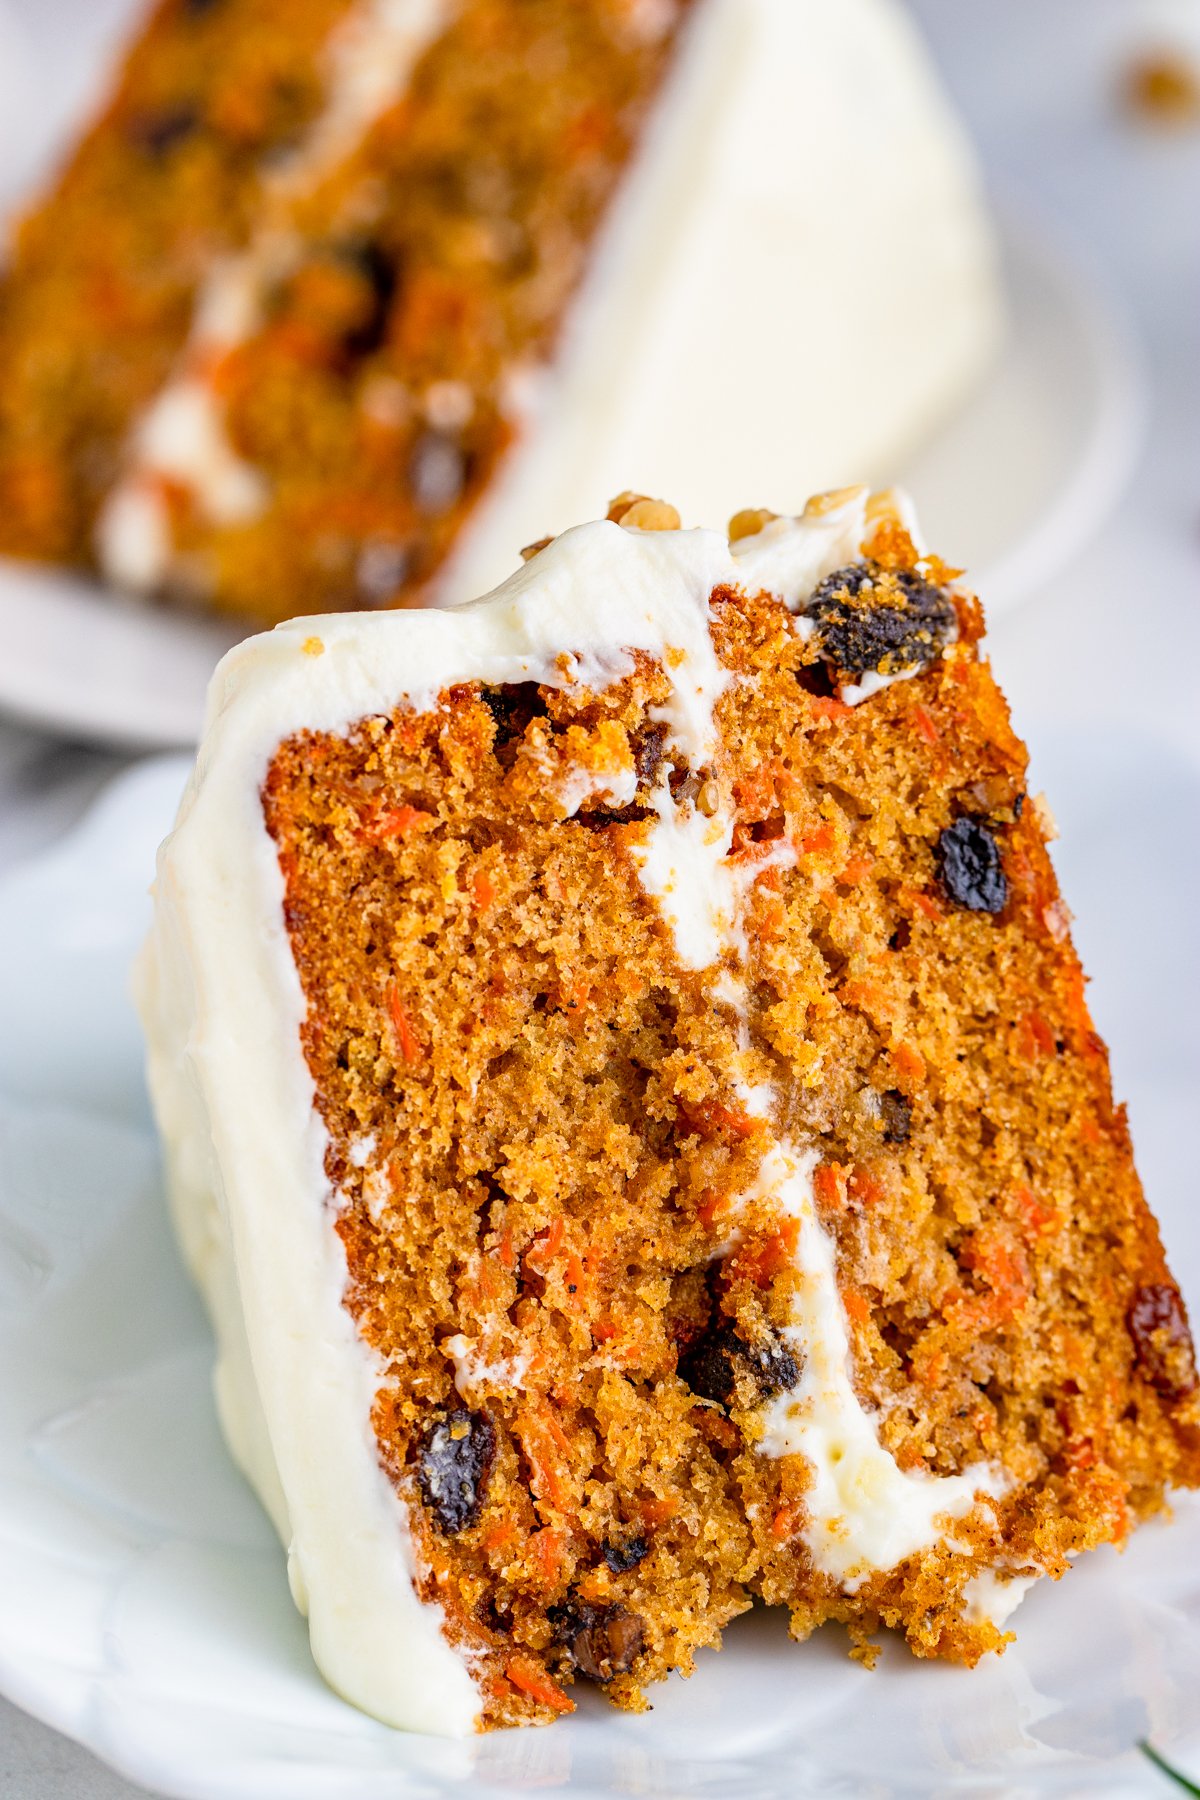 Close up of a slice of Layered Carrot Cake on white plate